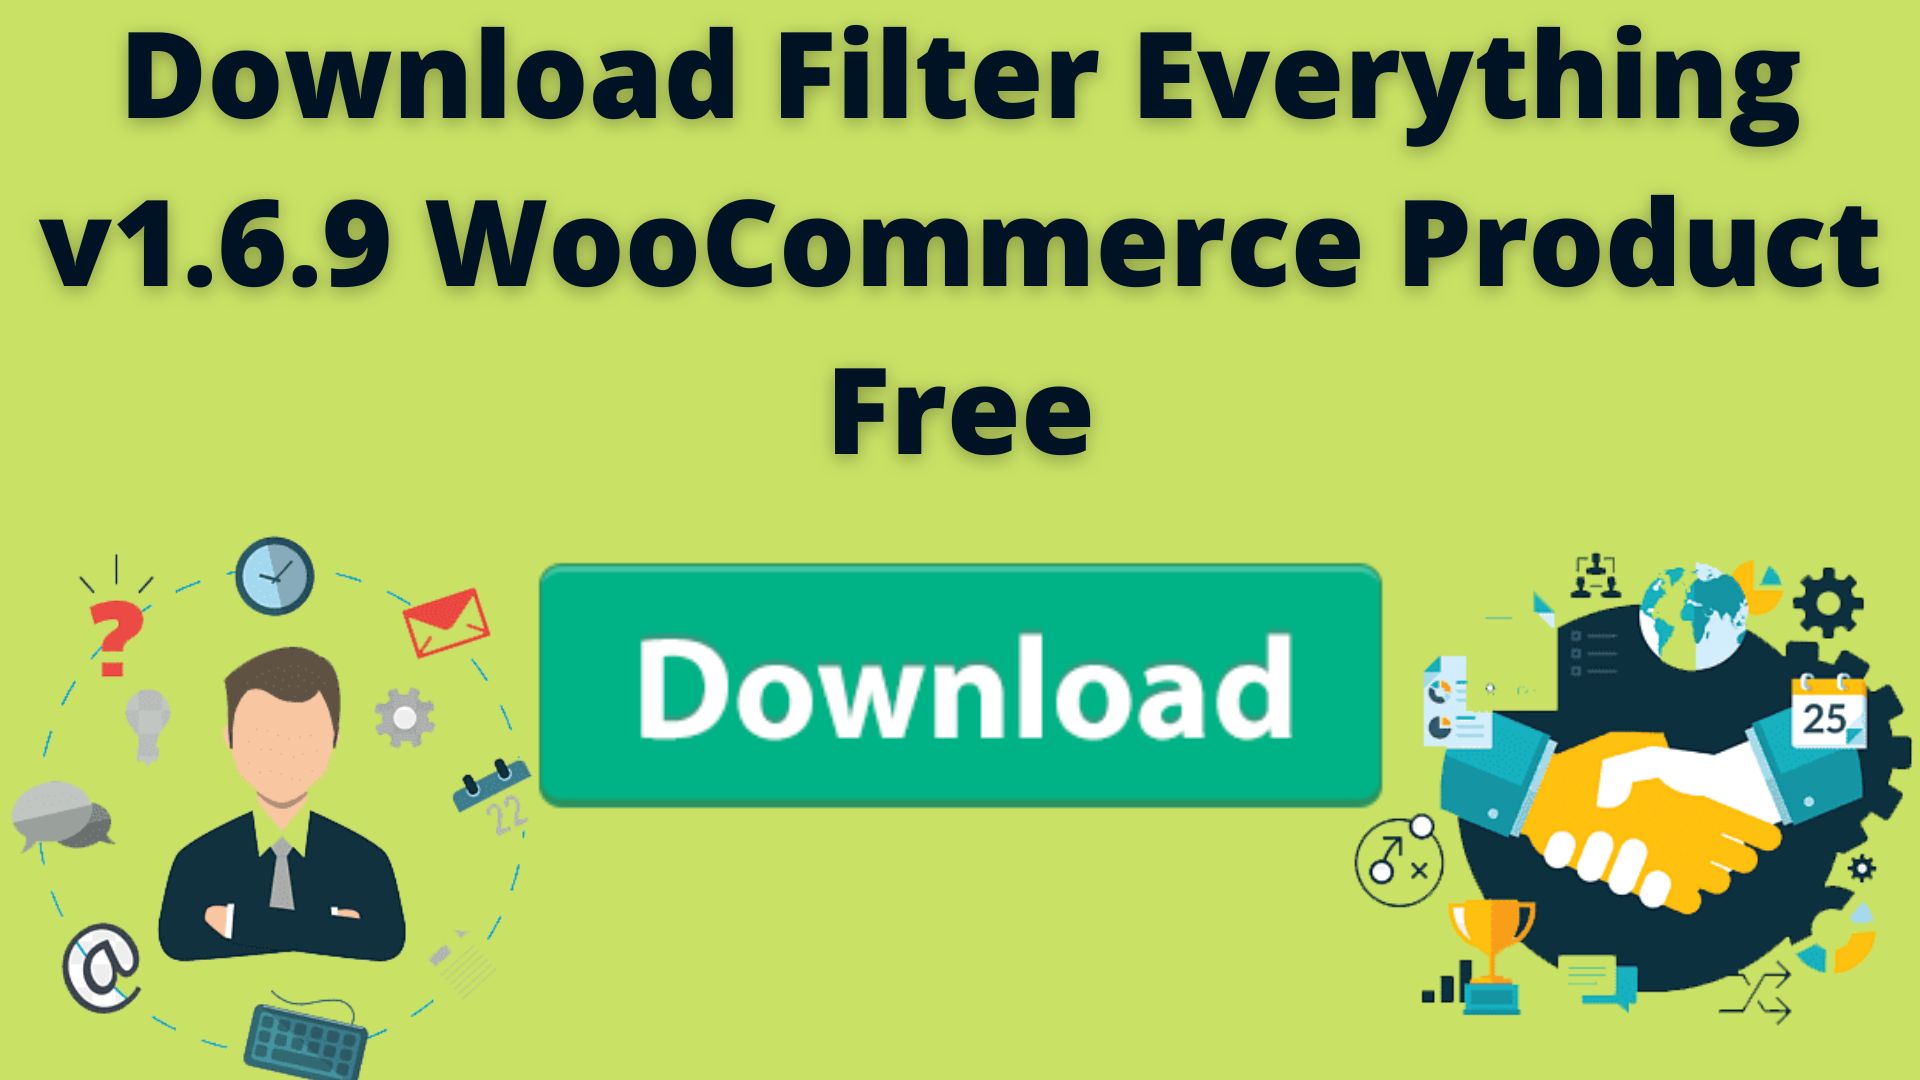 Download Filter Everything V1.6.9 Woocommerce Product Free